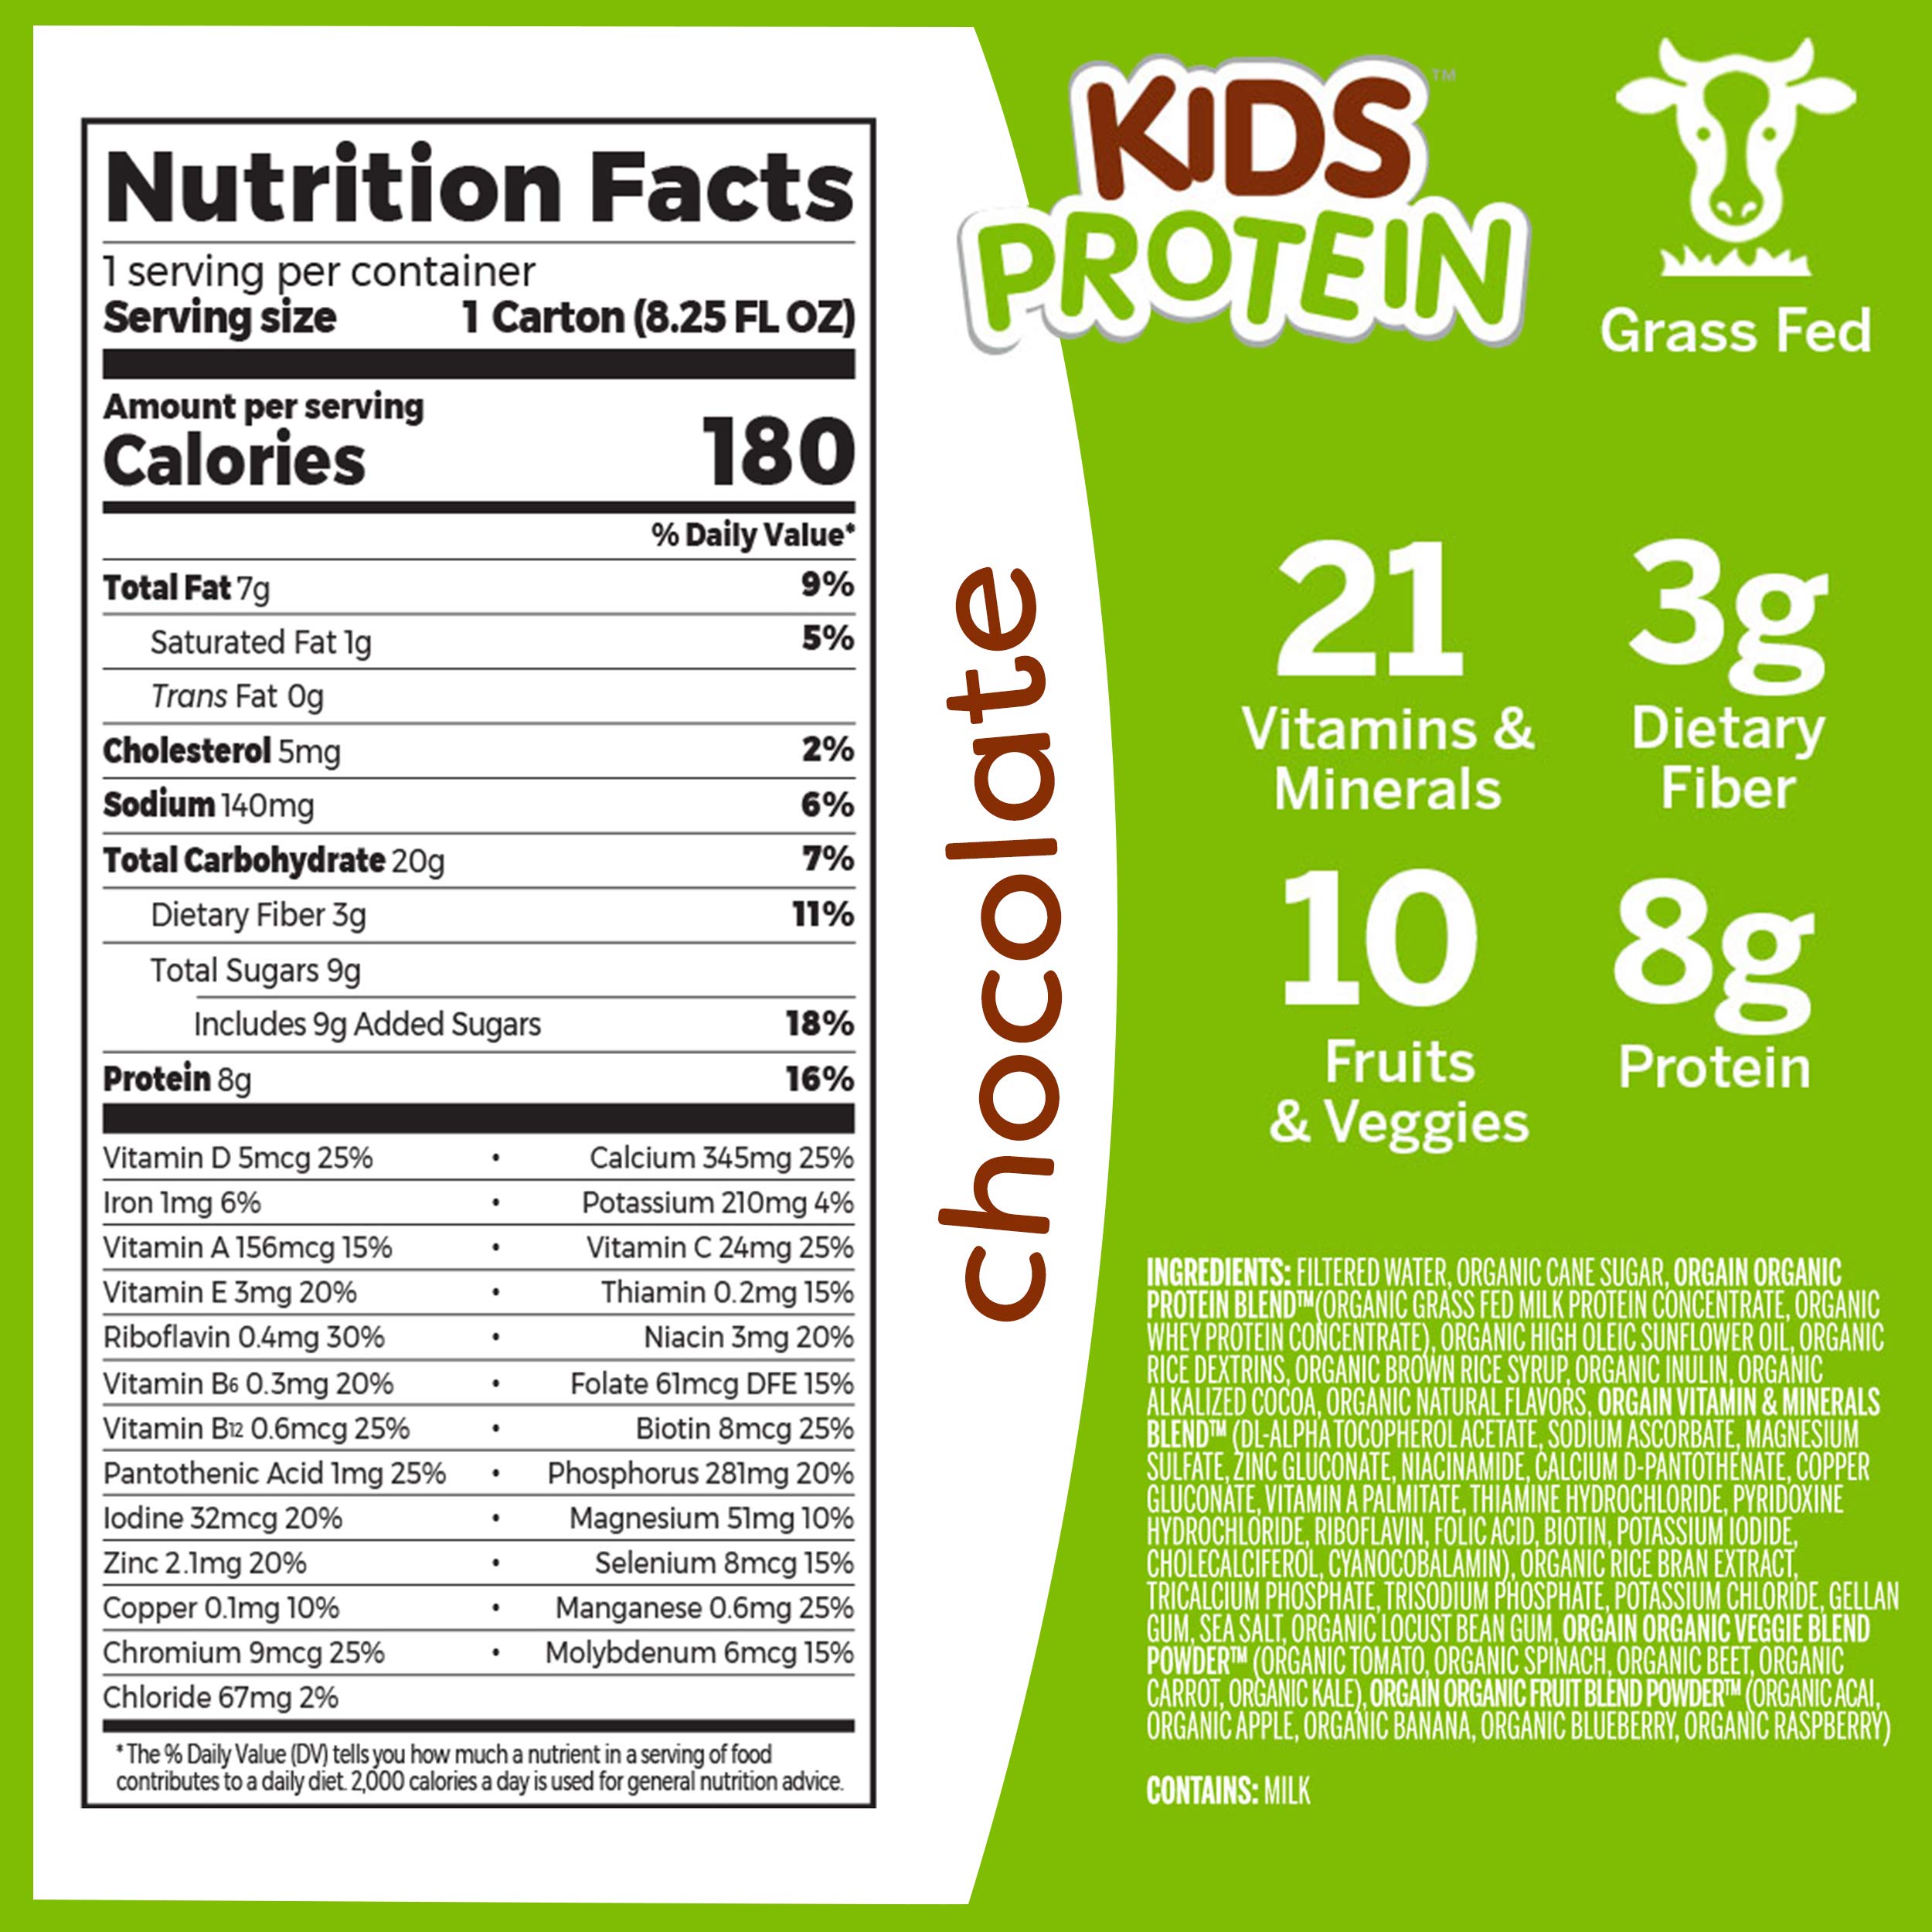 Orgain Organic Kids Protein Nutritional Shake, Chocolate - Great for Breakfast & Snacks, 21 Vitamins & Minerals, 10 Fruits & Vegetables, Gluten Free, Soy Free, 8.25 oz, 12 Count (Packaging May Vary)